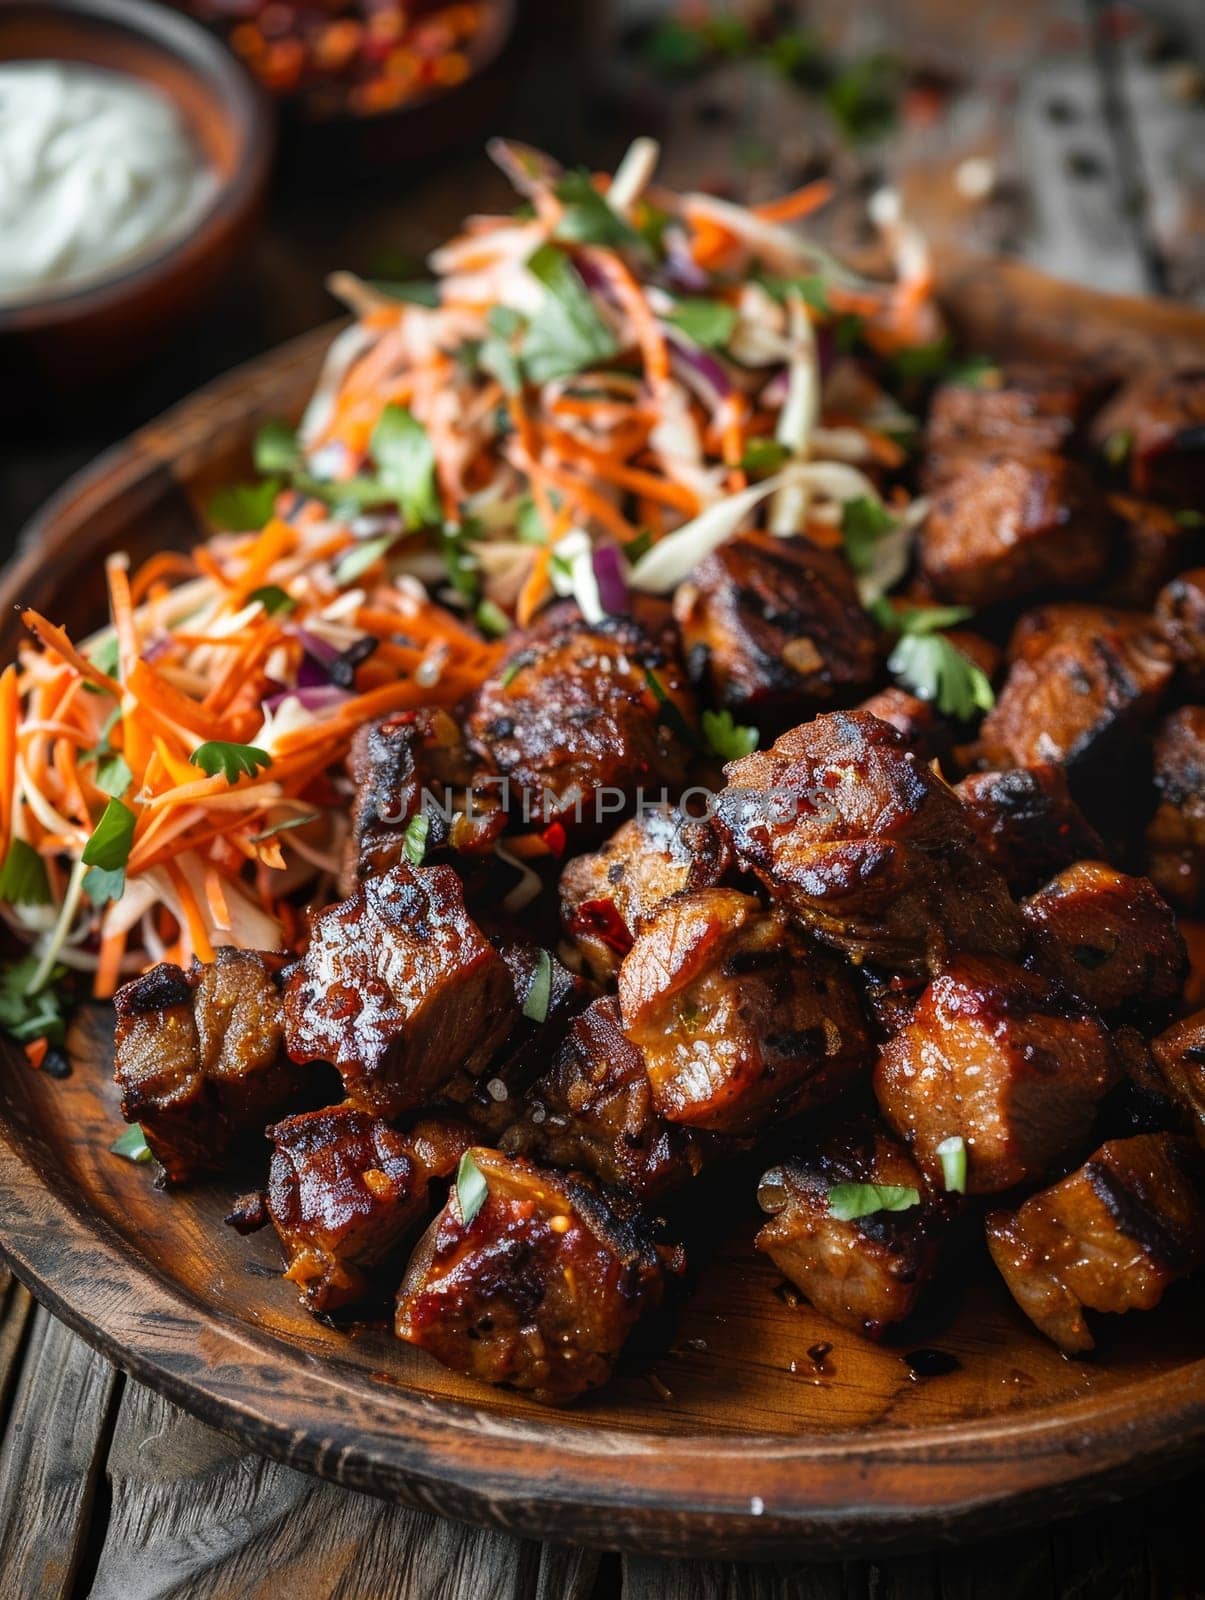 Authentic Haitian griot, marinated and fried pork cubes, served on a tray with a vibrant spicy slaw - a mouthwatering representation of the rich culinary heritage and flavors of the Caribbean. by sfinks